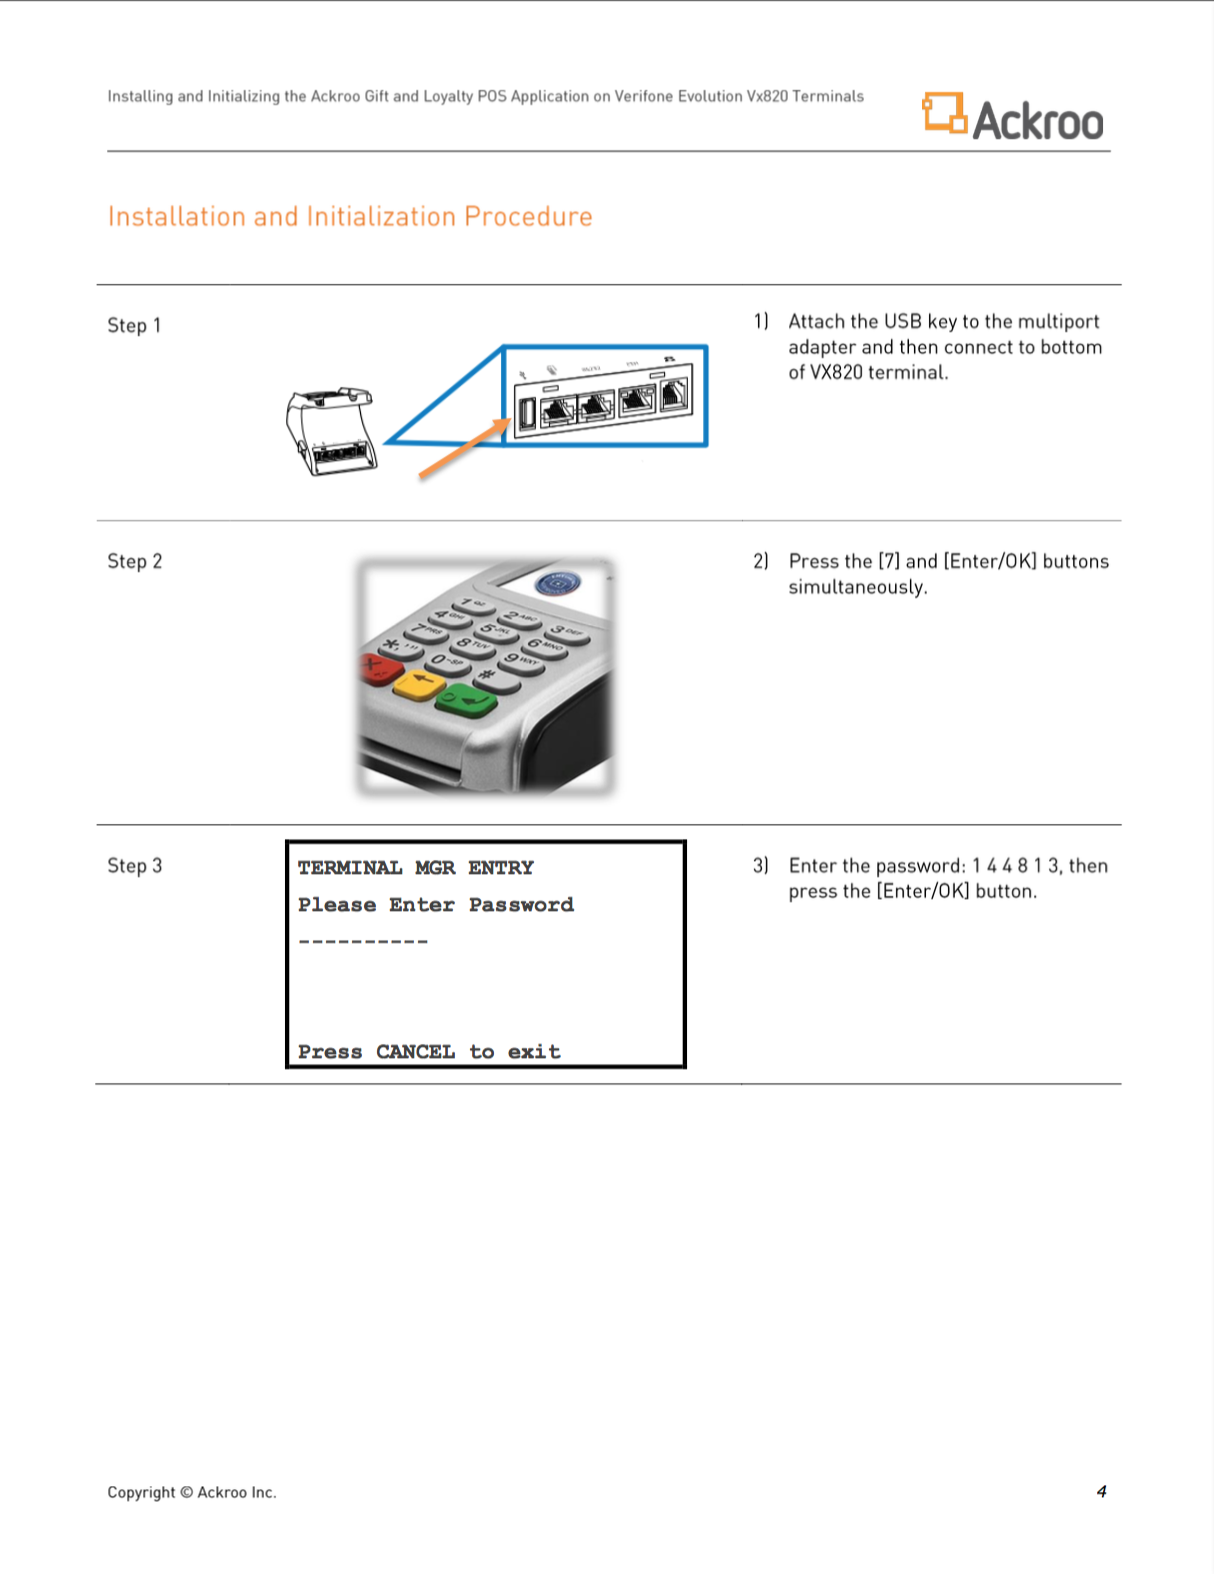 Verifone_Evolution_Vx820_Ackapp_installation_guide_-_Page_4.png